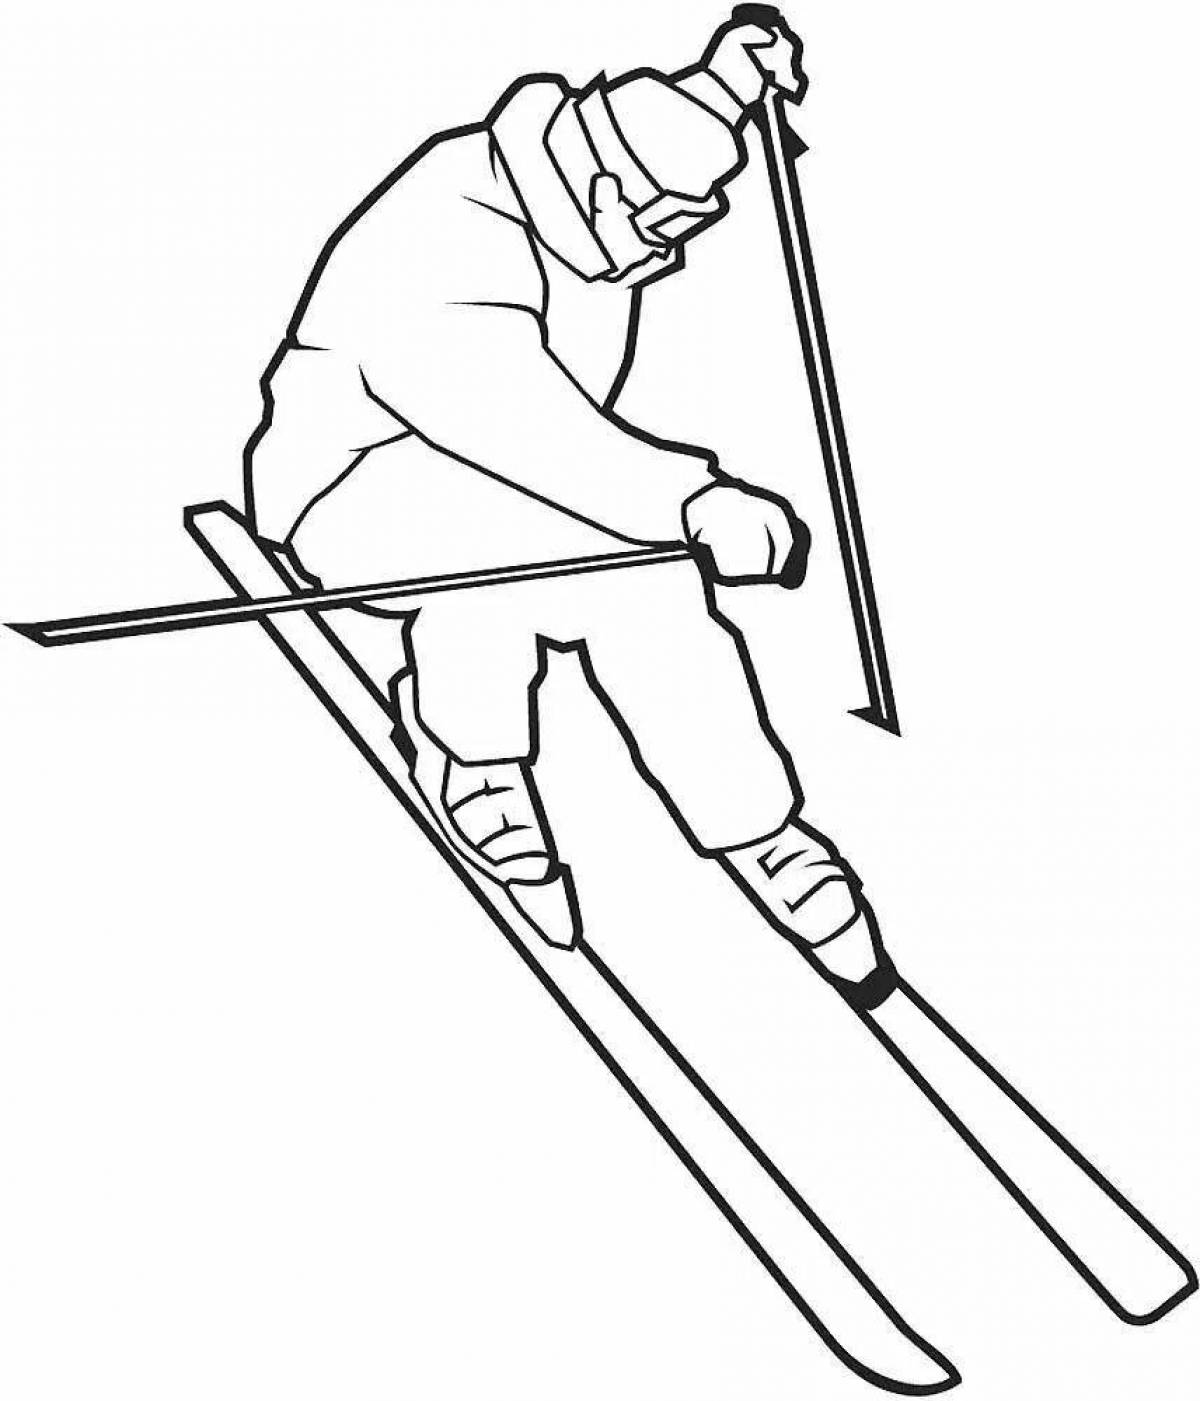 Live skier coloring book for kids